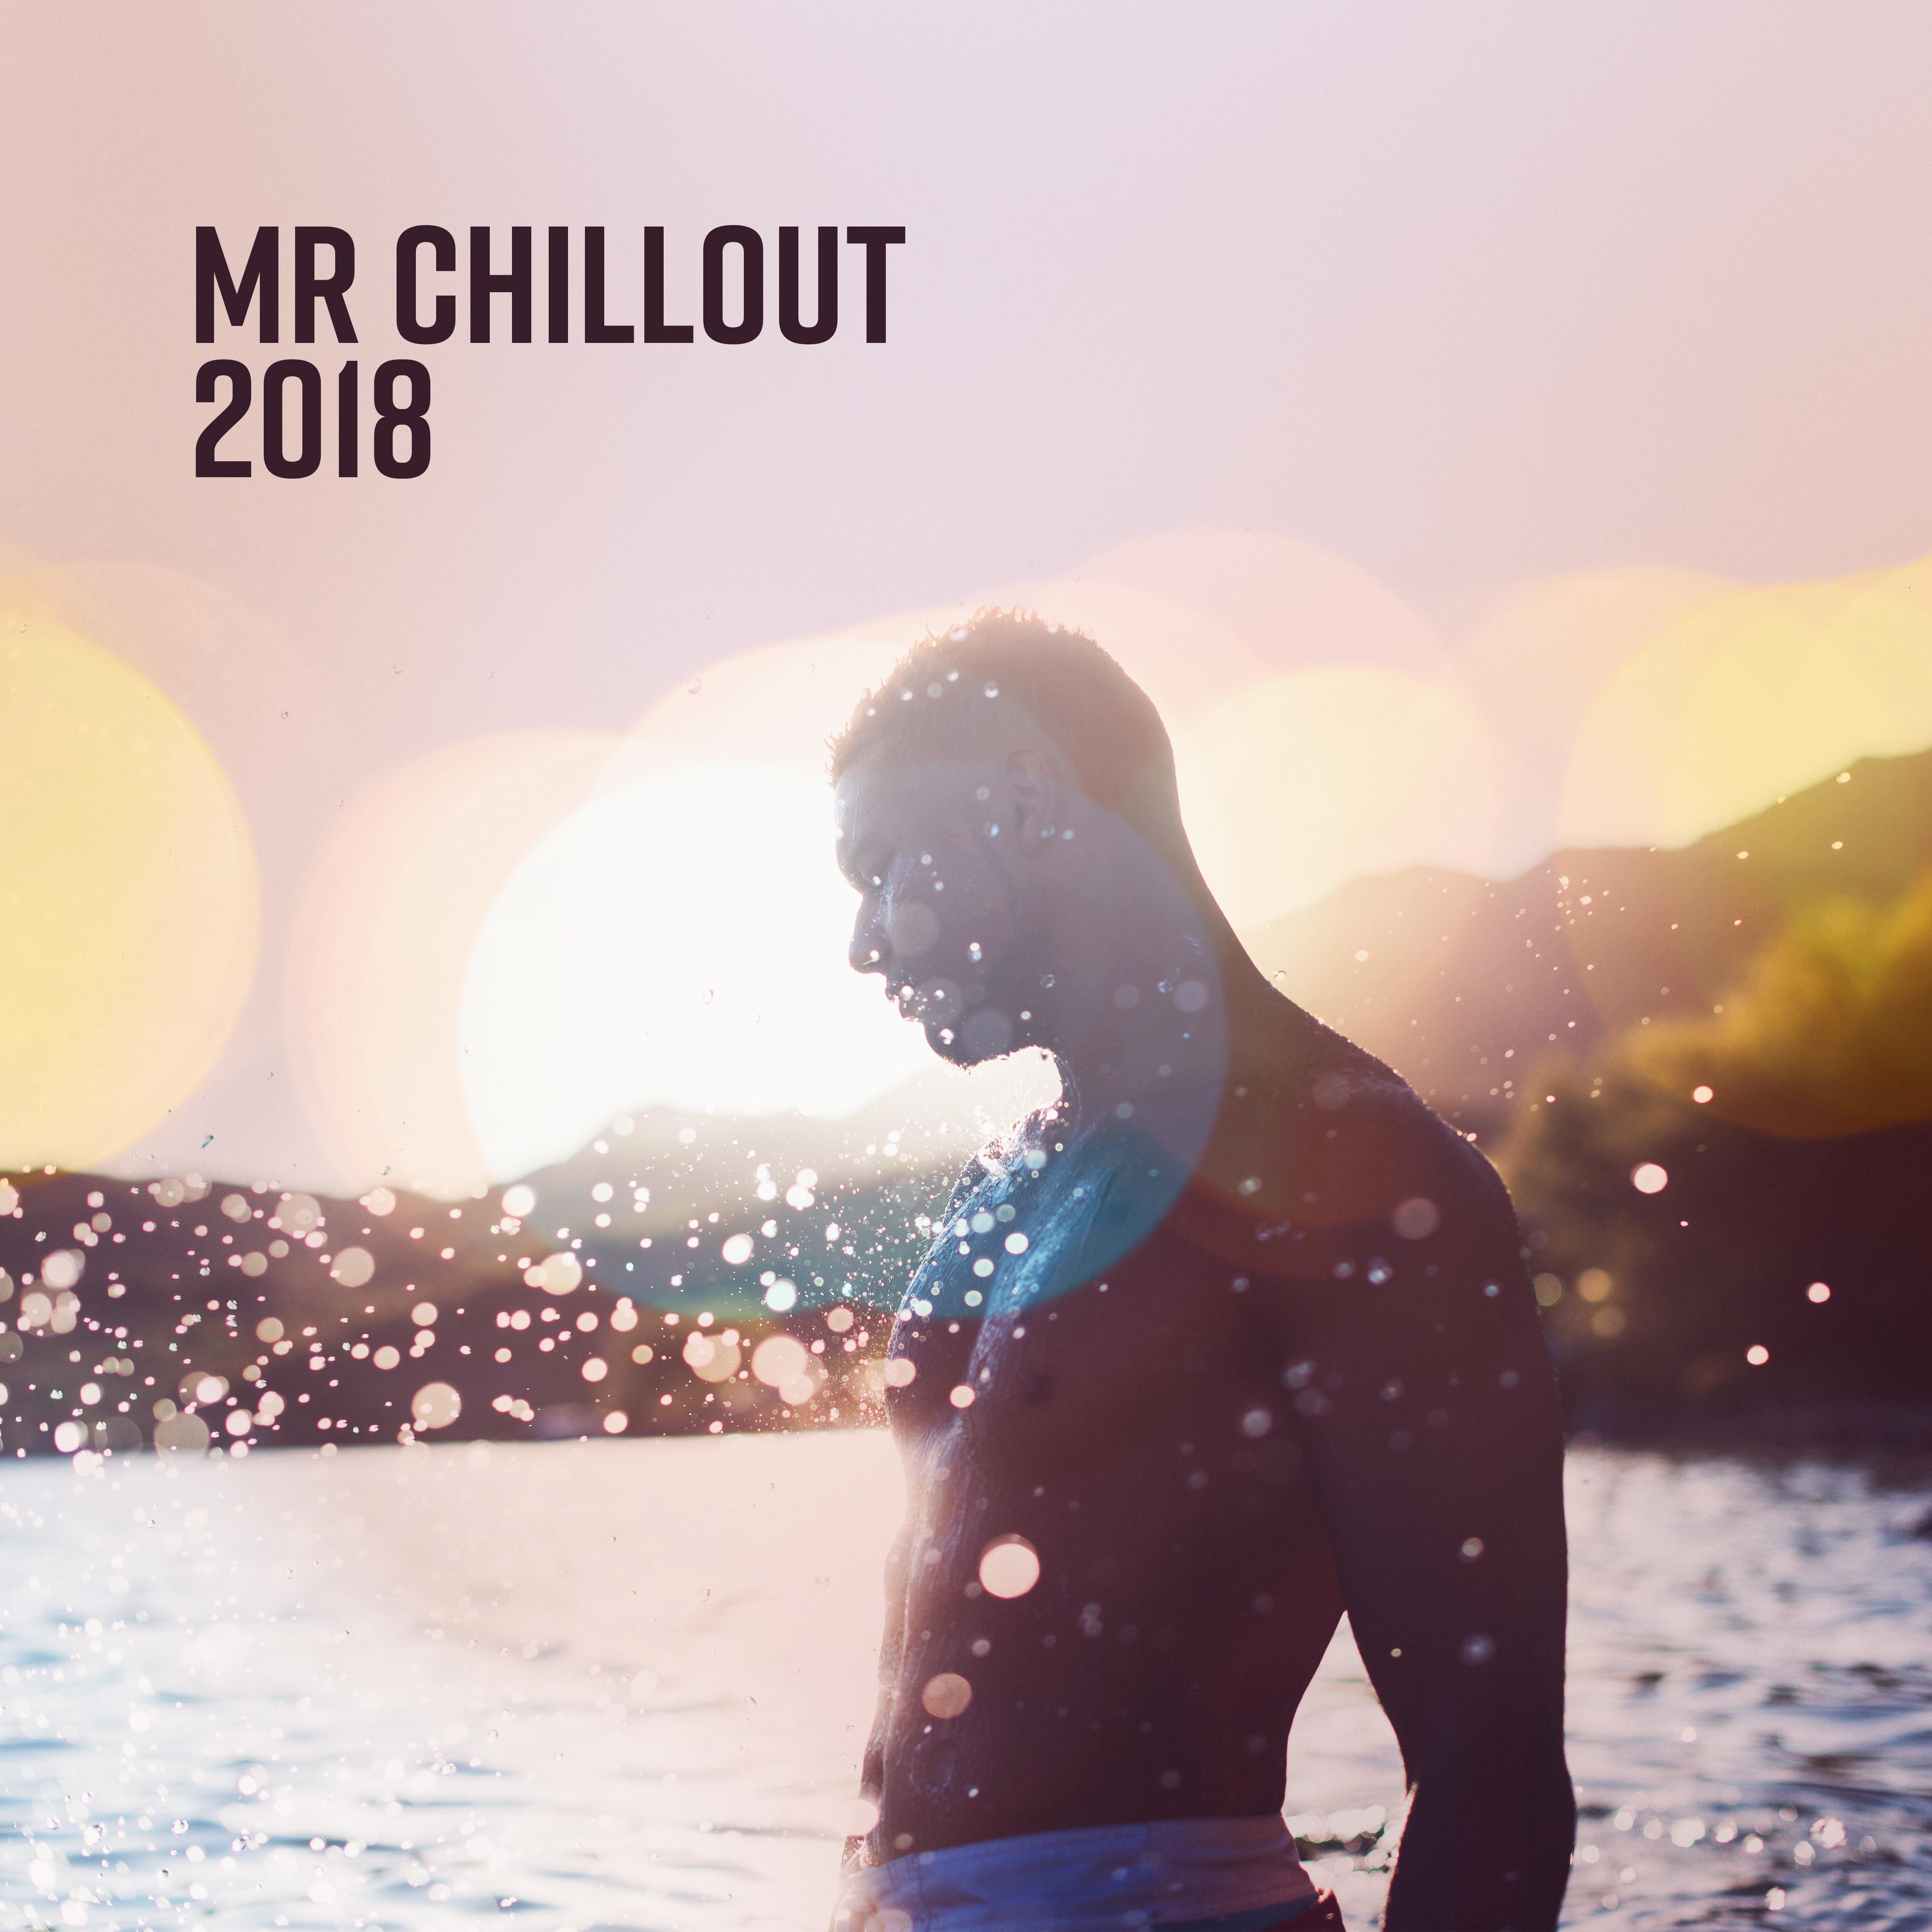 Mr Chillout 2018